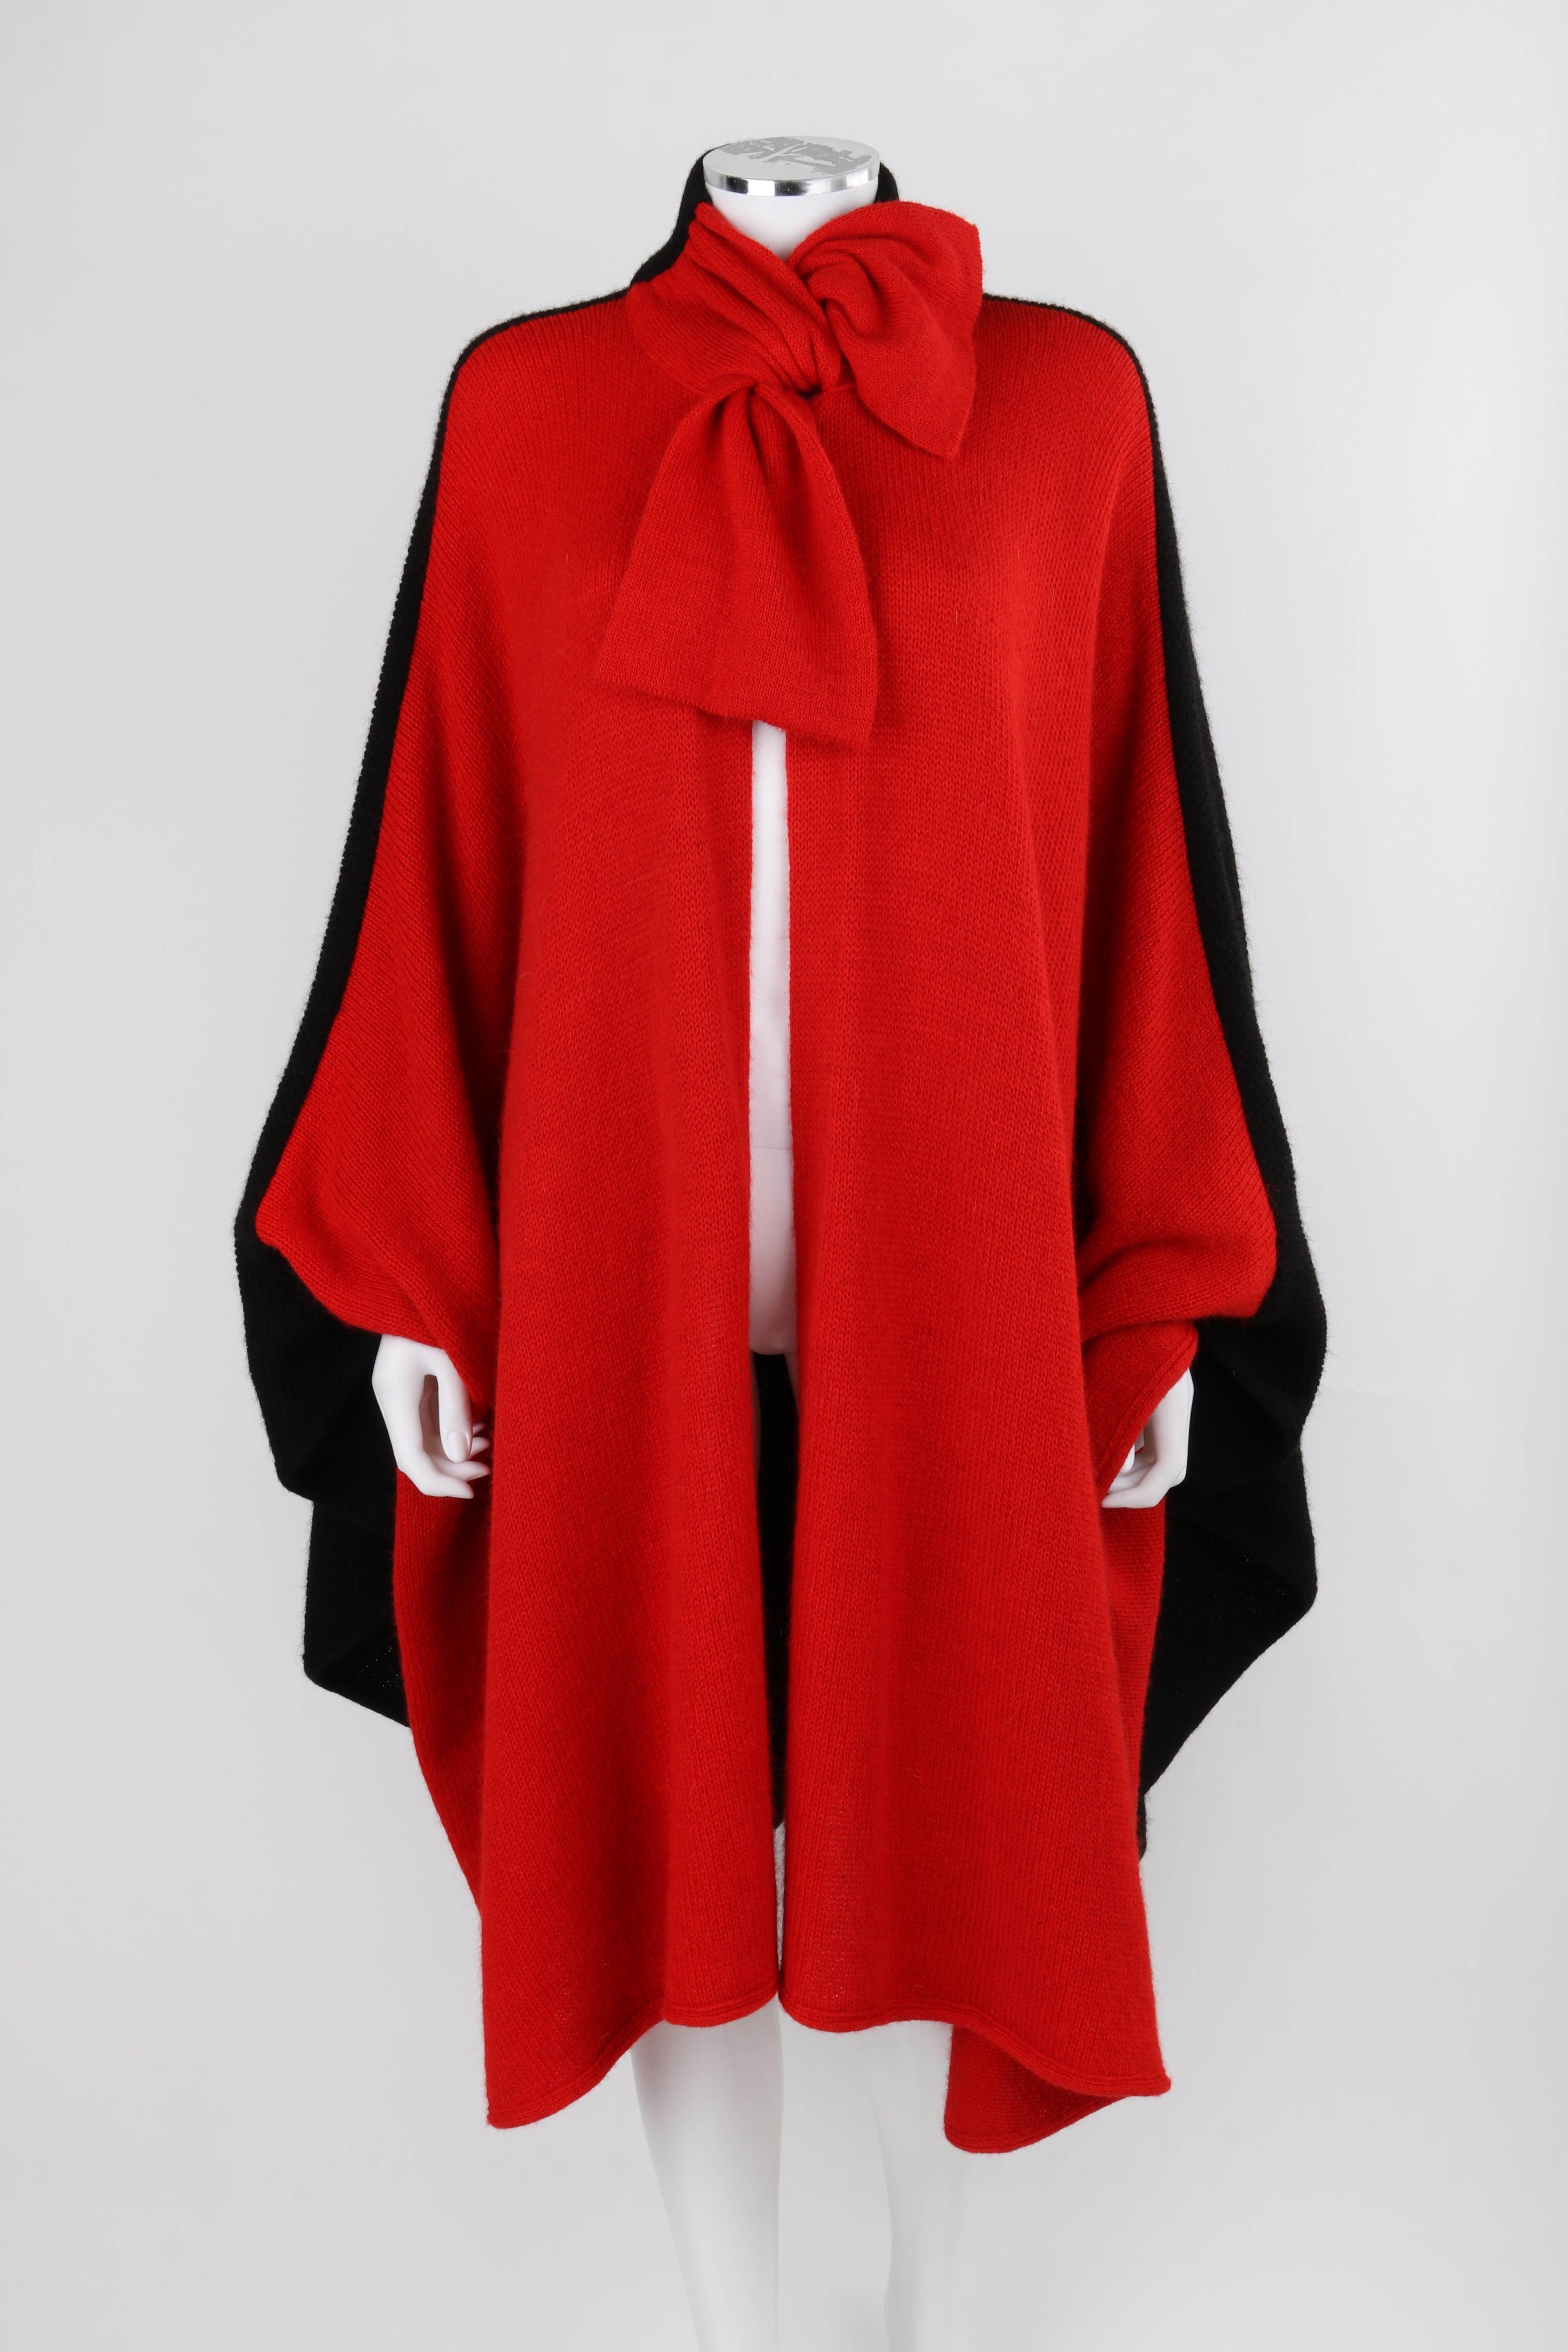 VALENTINO Knitwear c.1980's Vtg Red Black Alpaca Wool Knit Scarf Tie Button Cape For Sale 1